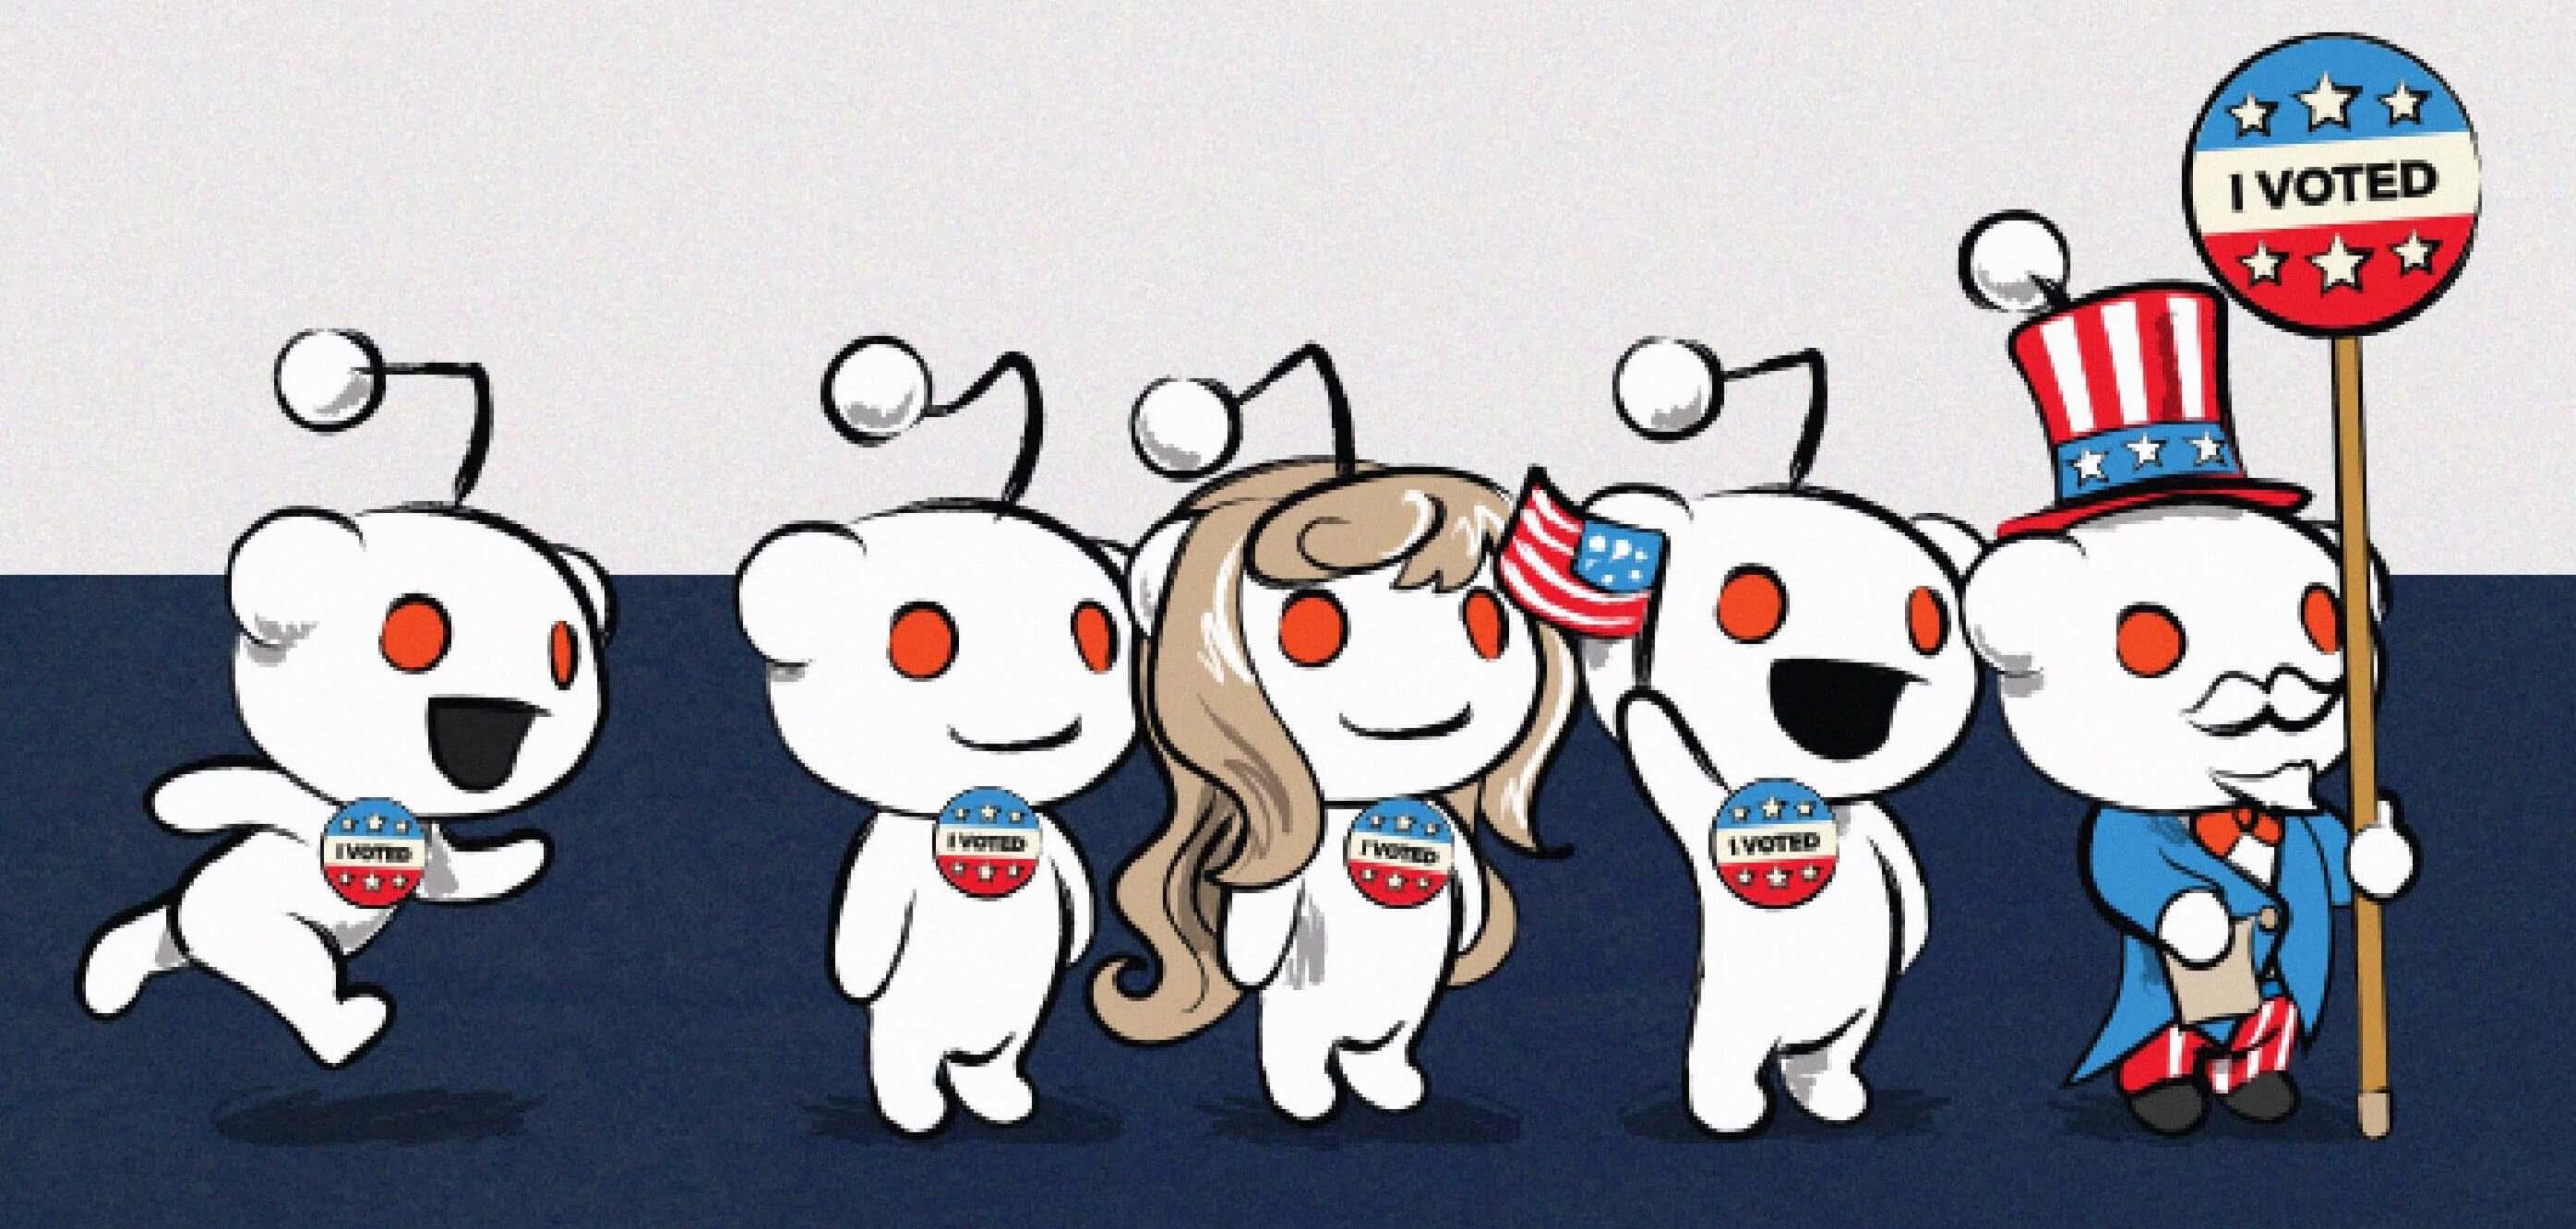 Reddit Has Made A Dedicated Subreddit To Track Political Ad